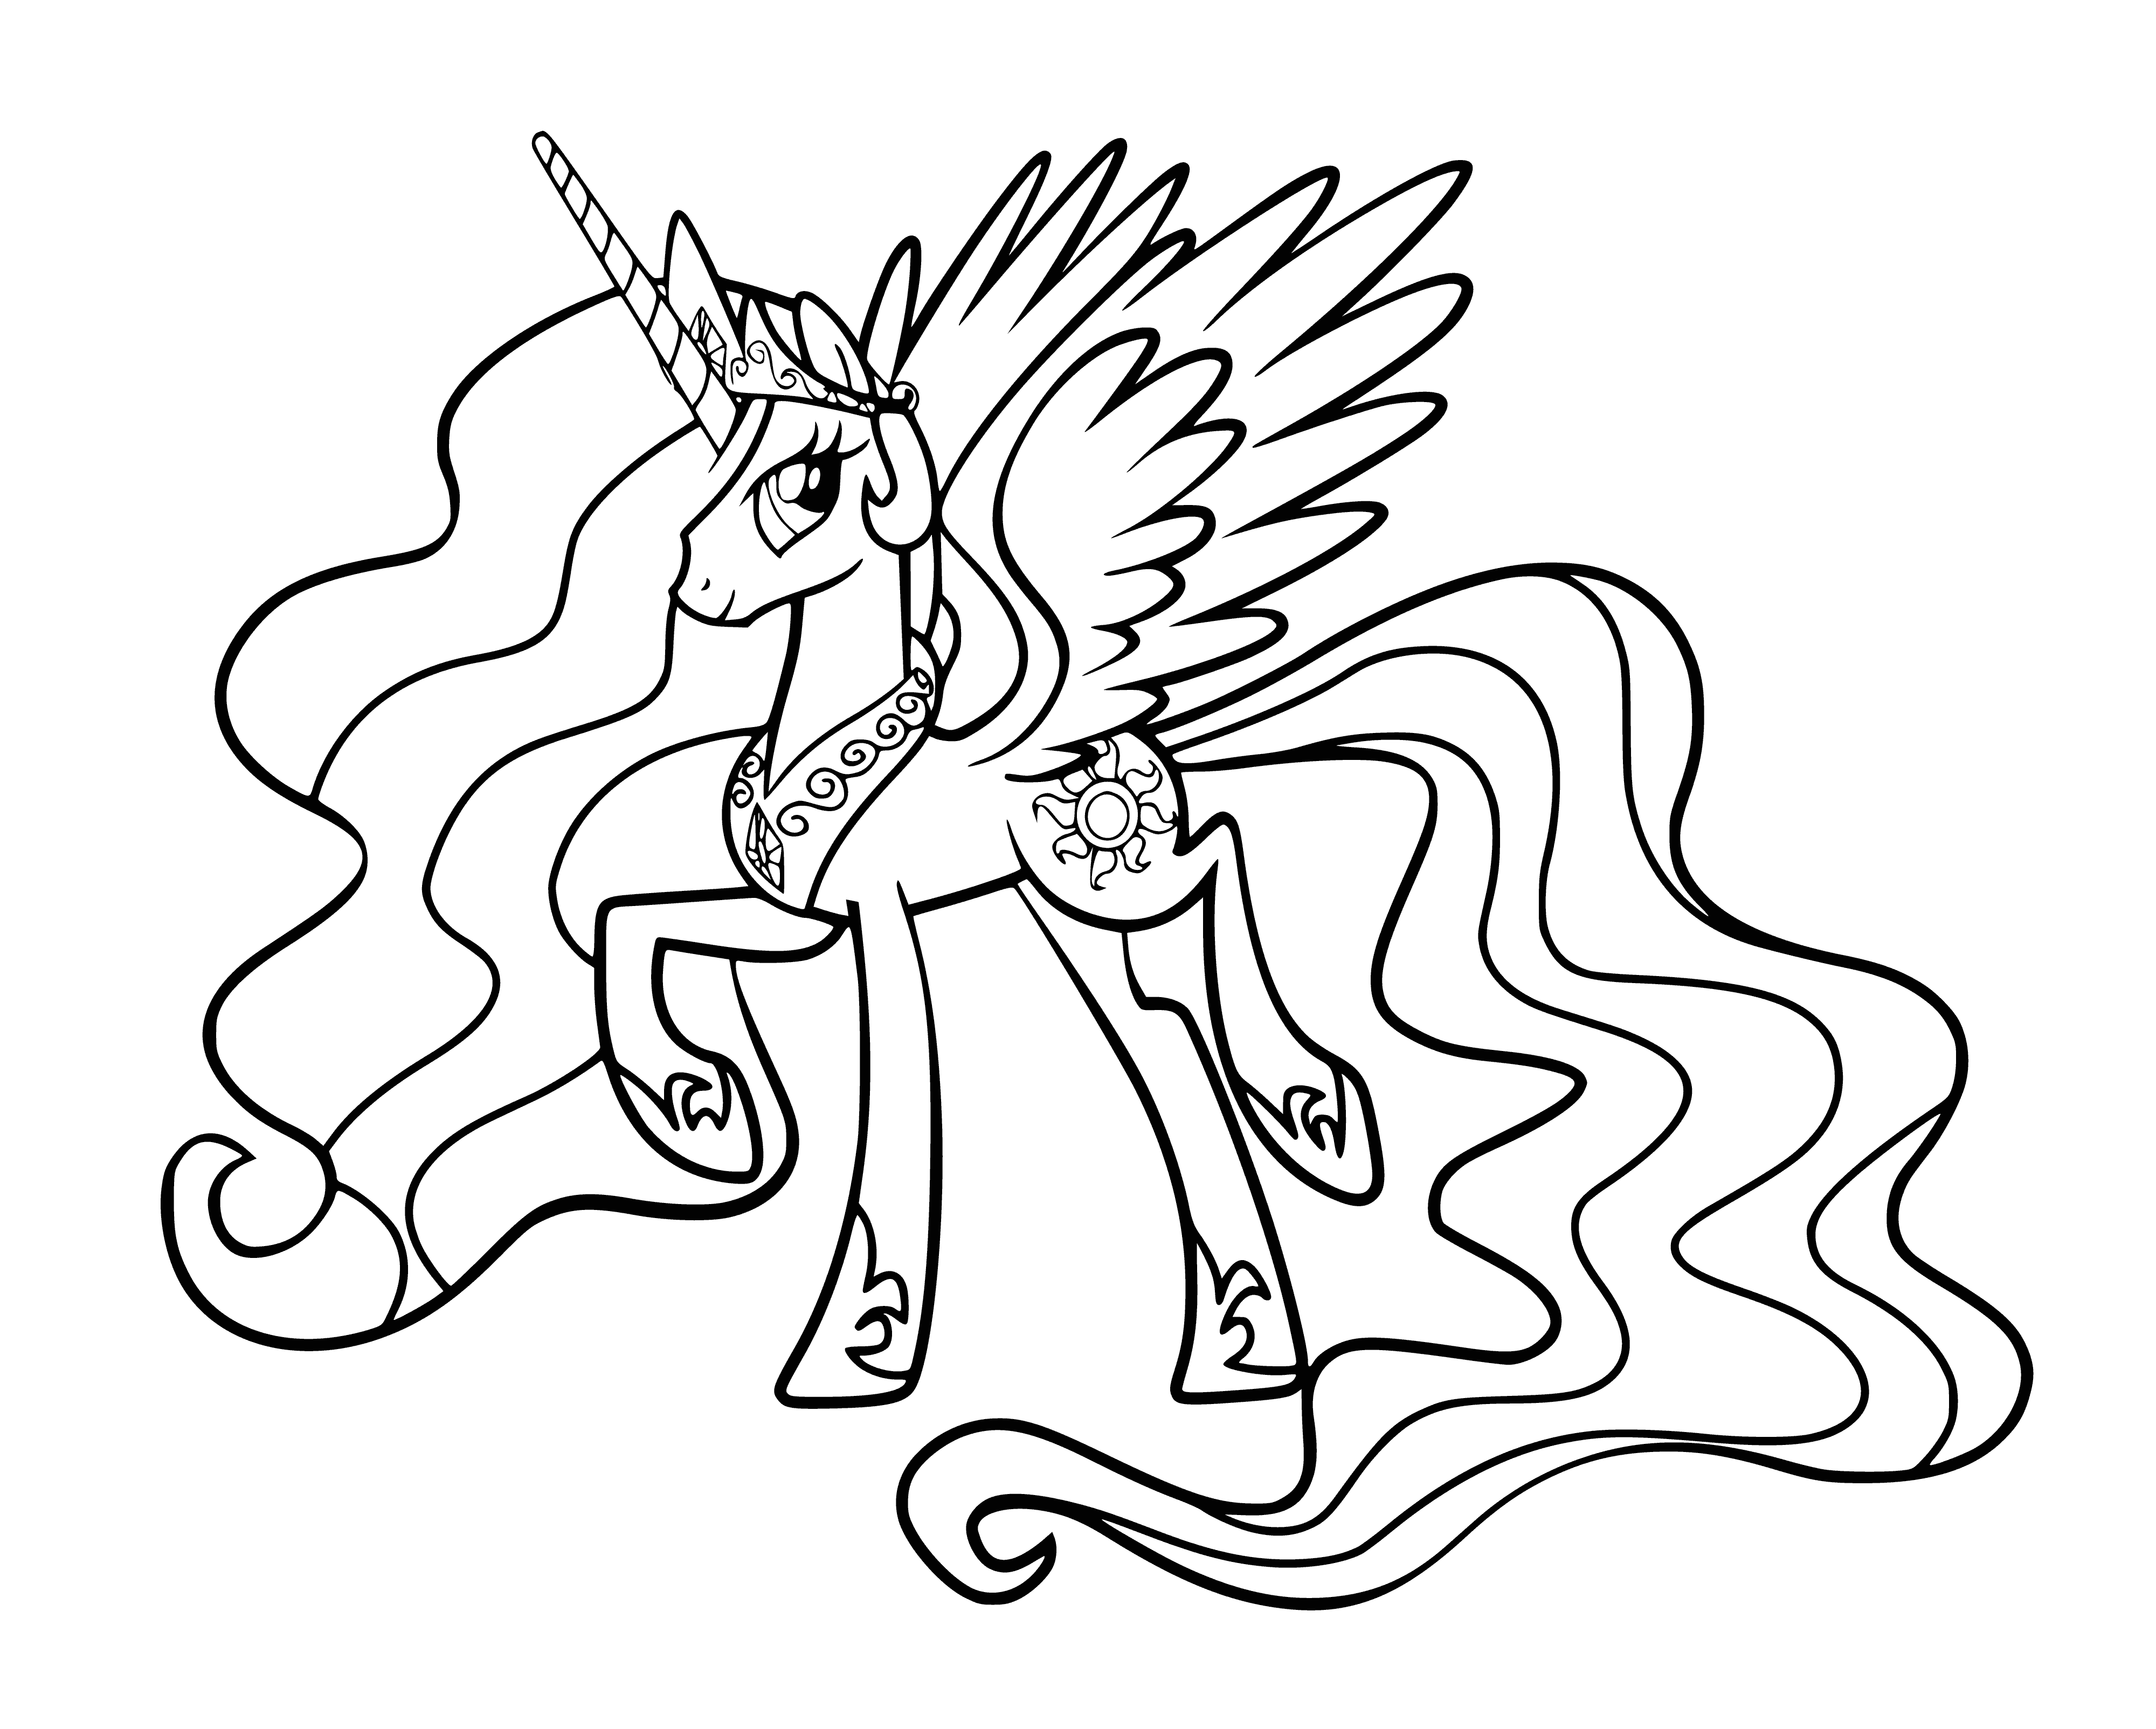 coloring page: Princess Celestia is an alicorn mare ruling Equestria & mentoring Twilight Sparkle; white w/ long mane & tail, blue eye marking, sun & star cutie mark.